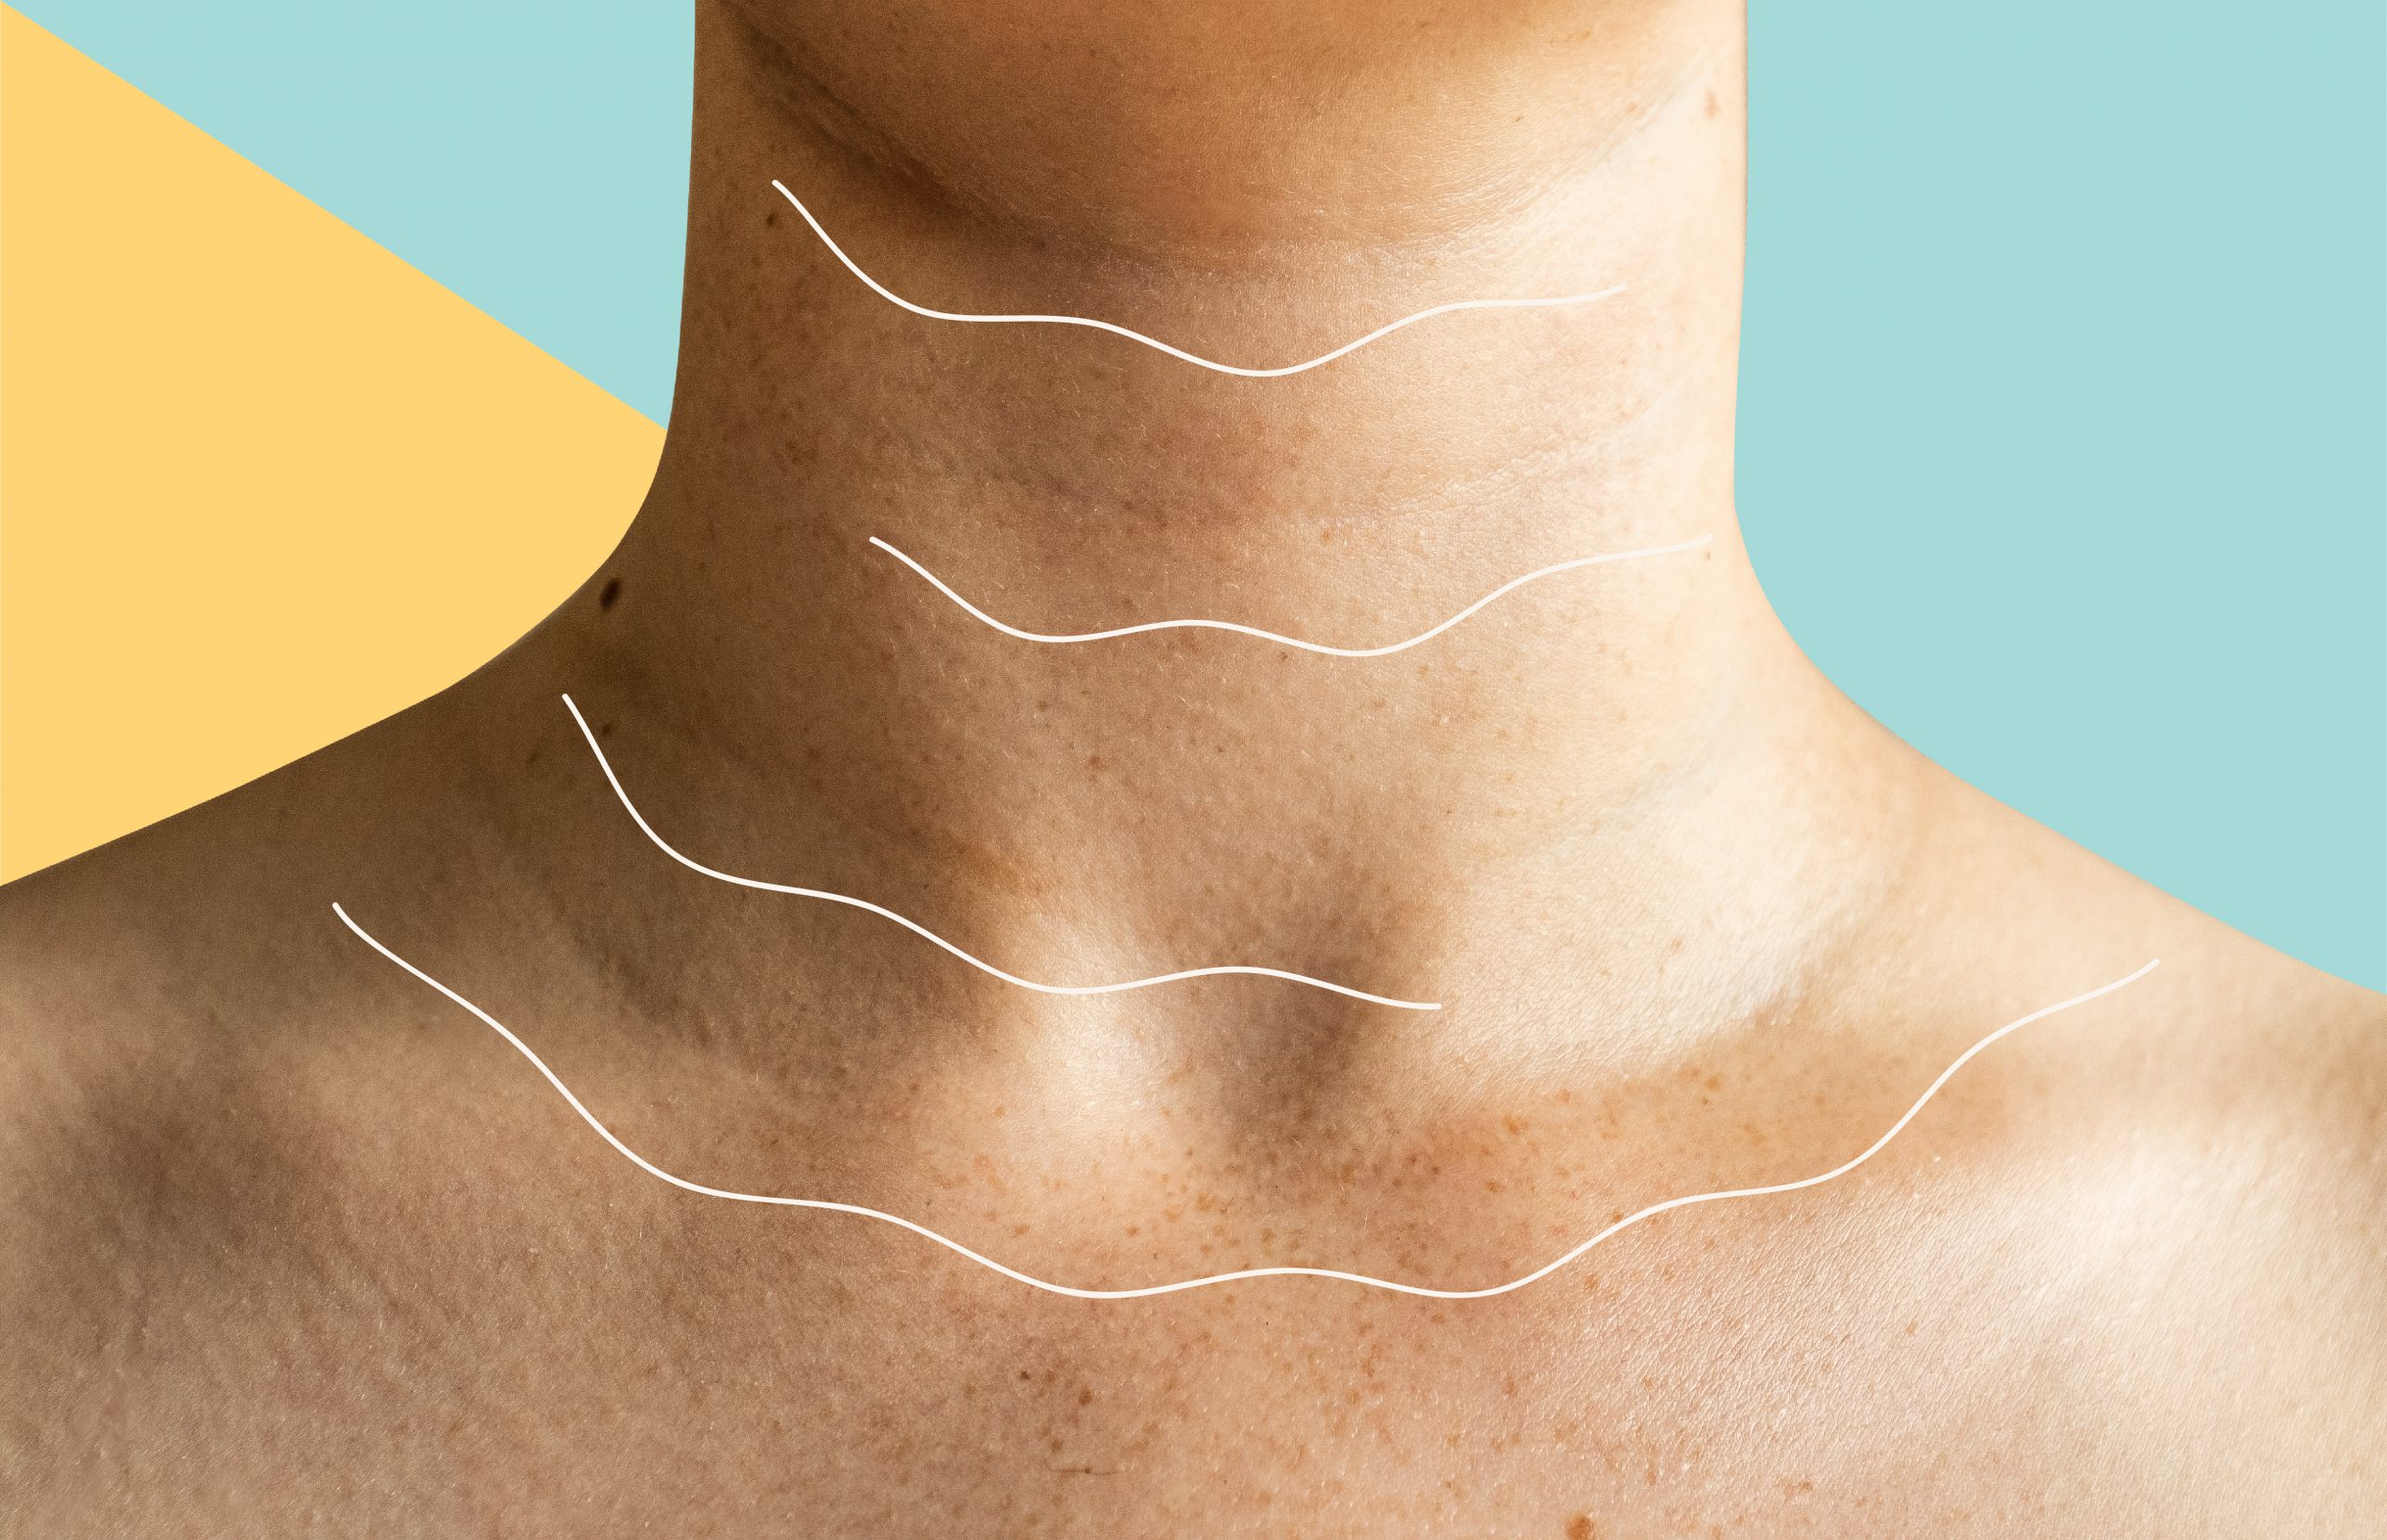 How to Prevent and Get Rid of “Tech Neck,” According to Skincare Experts